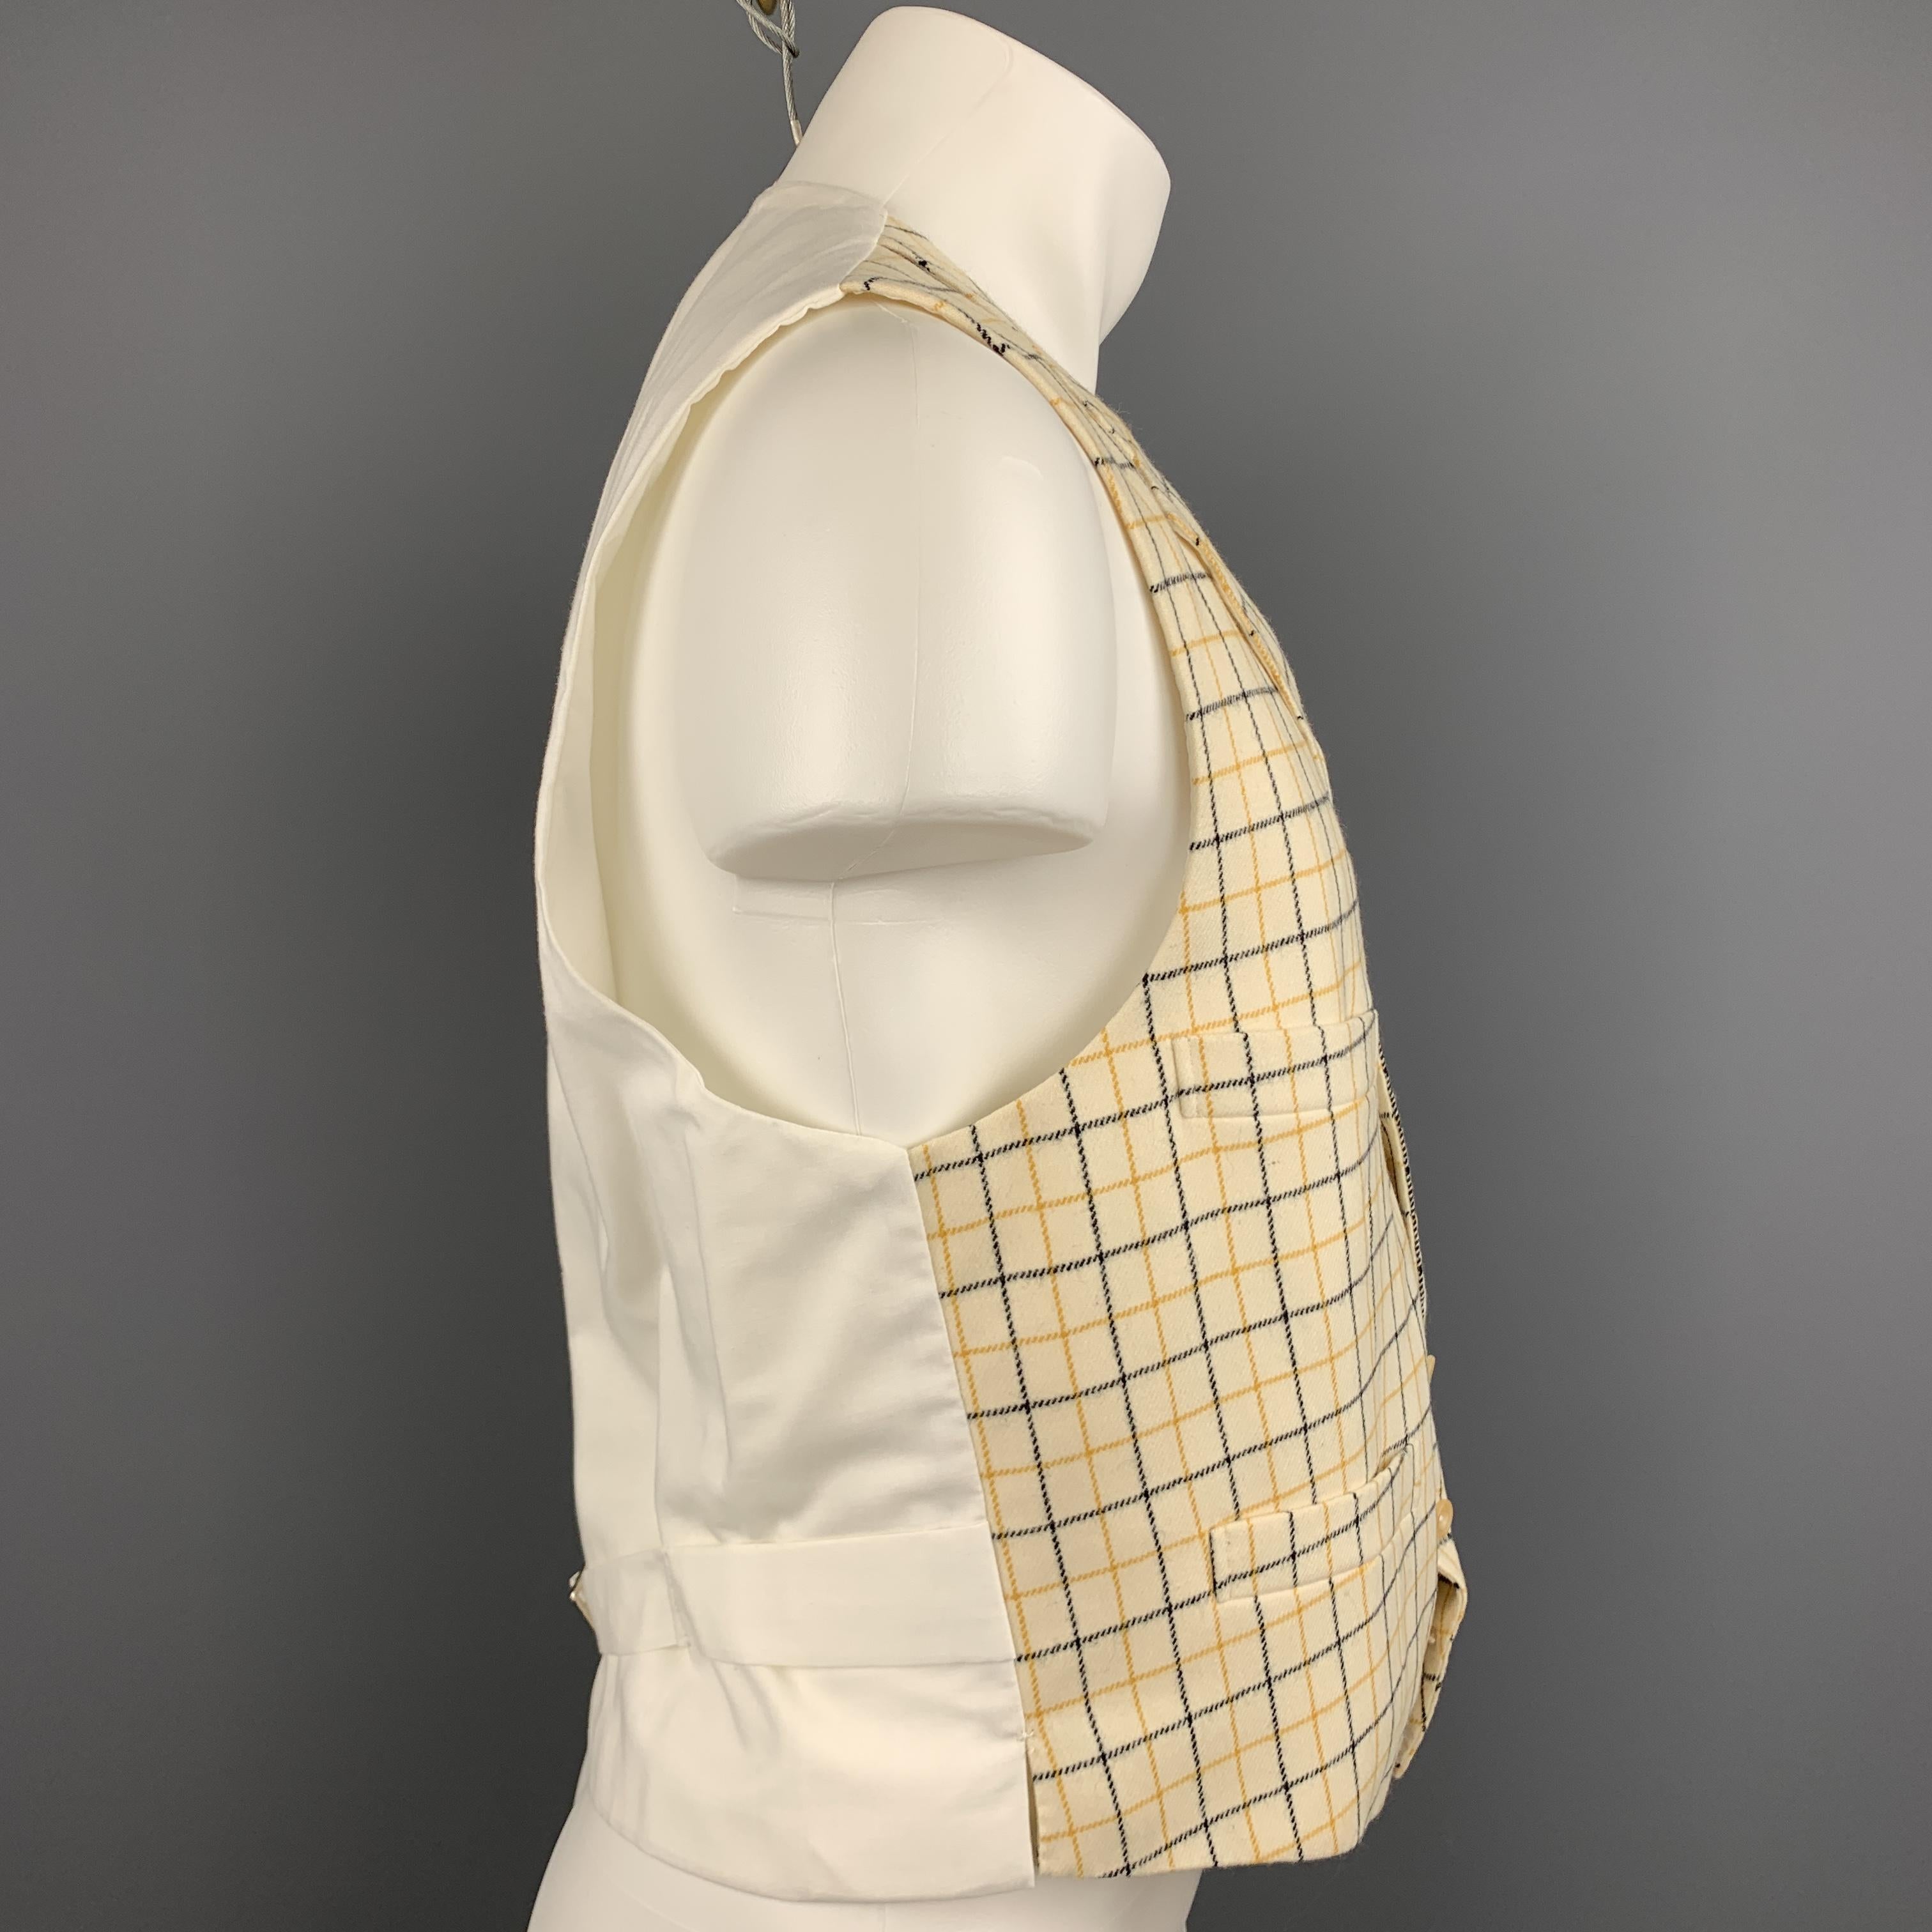 Custom Made HENRY POOLE & CO of Savile Row vest comes in a beige window pane wool featuring a notch lapel style, slit pockets, back belt, and a buttoned closure. Made in England.

Excellent Pre-Owned Condition.
Marked: (No